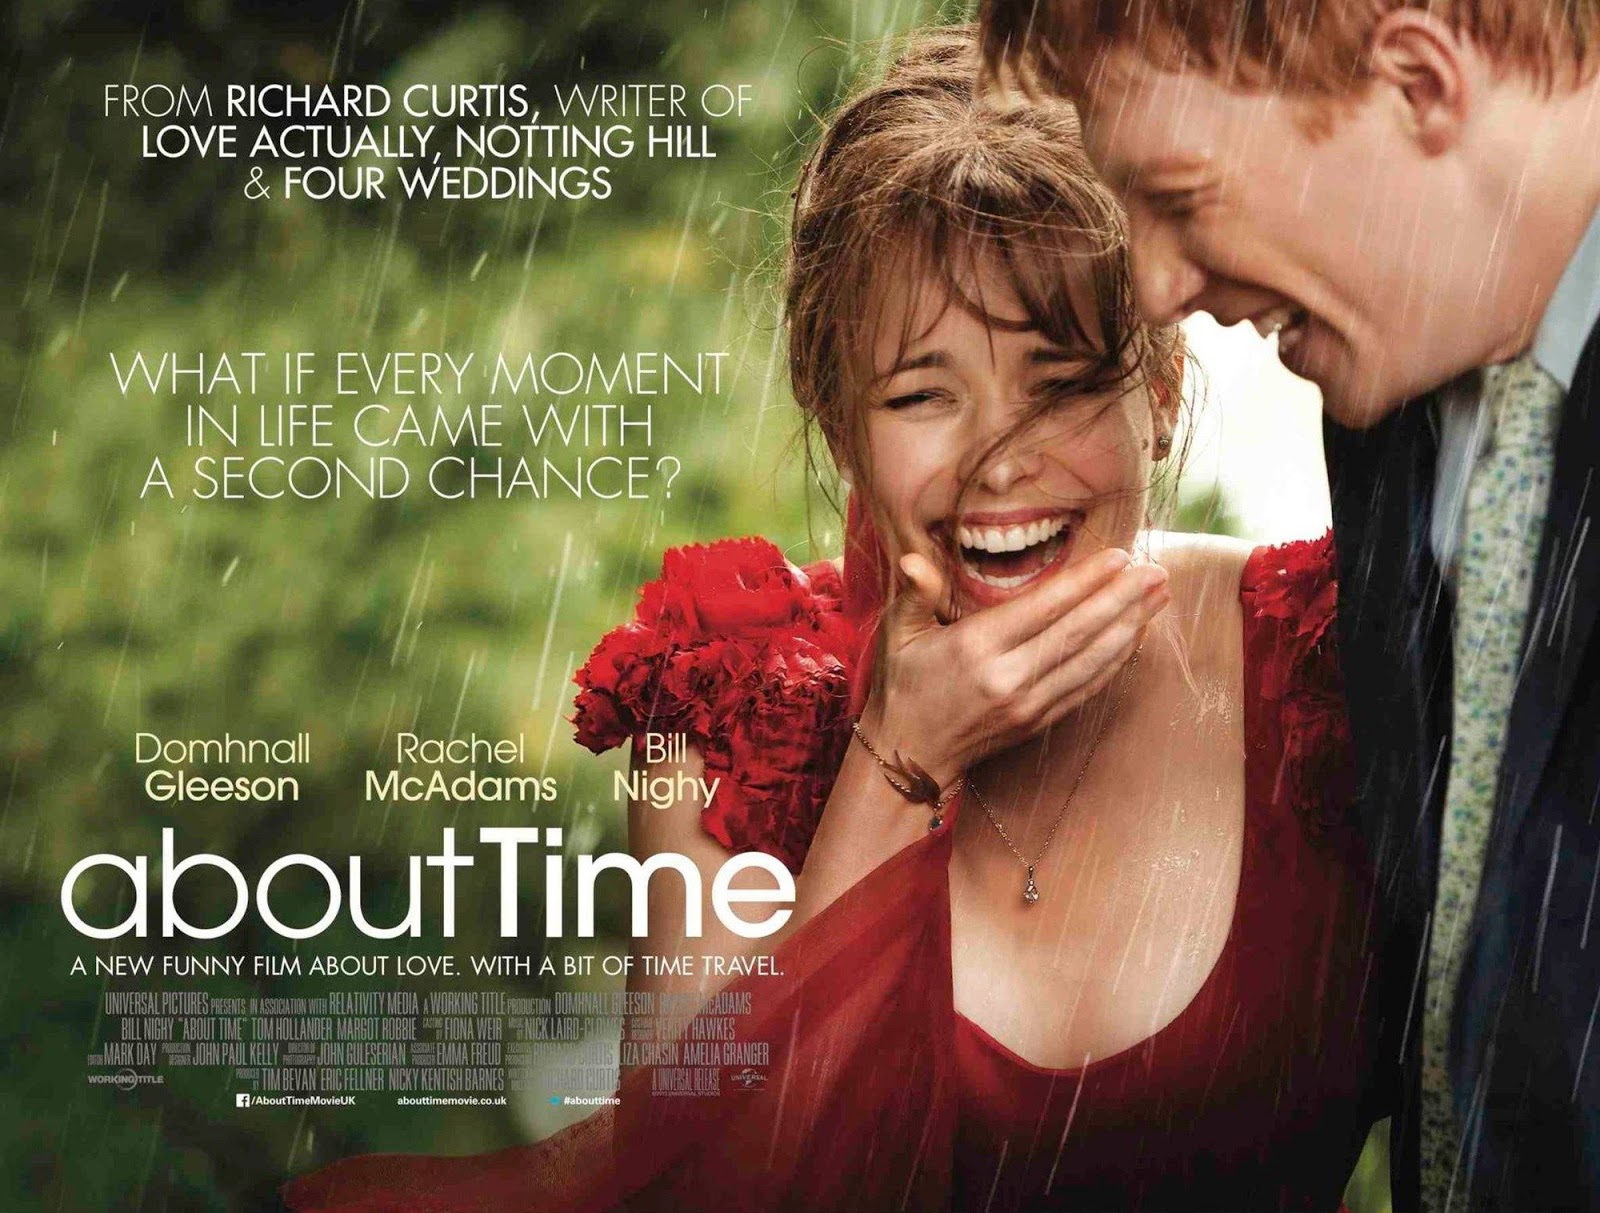 about time movie showings